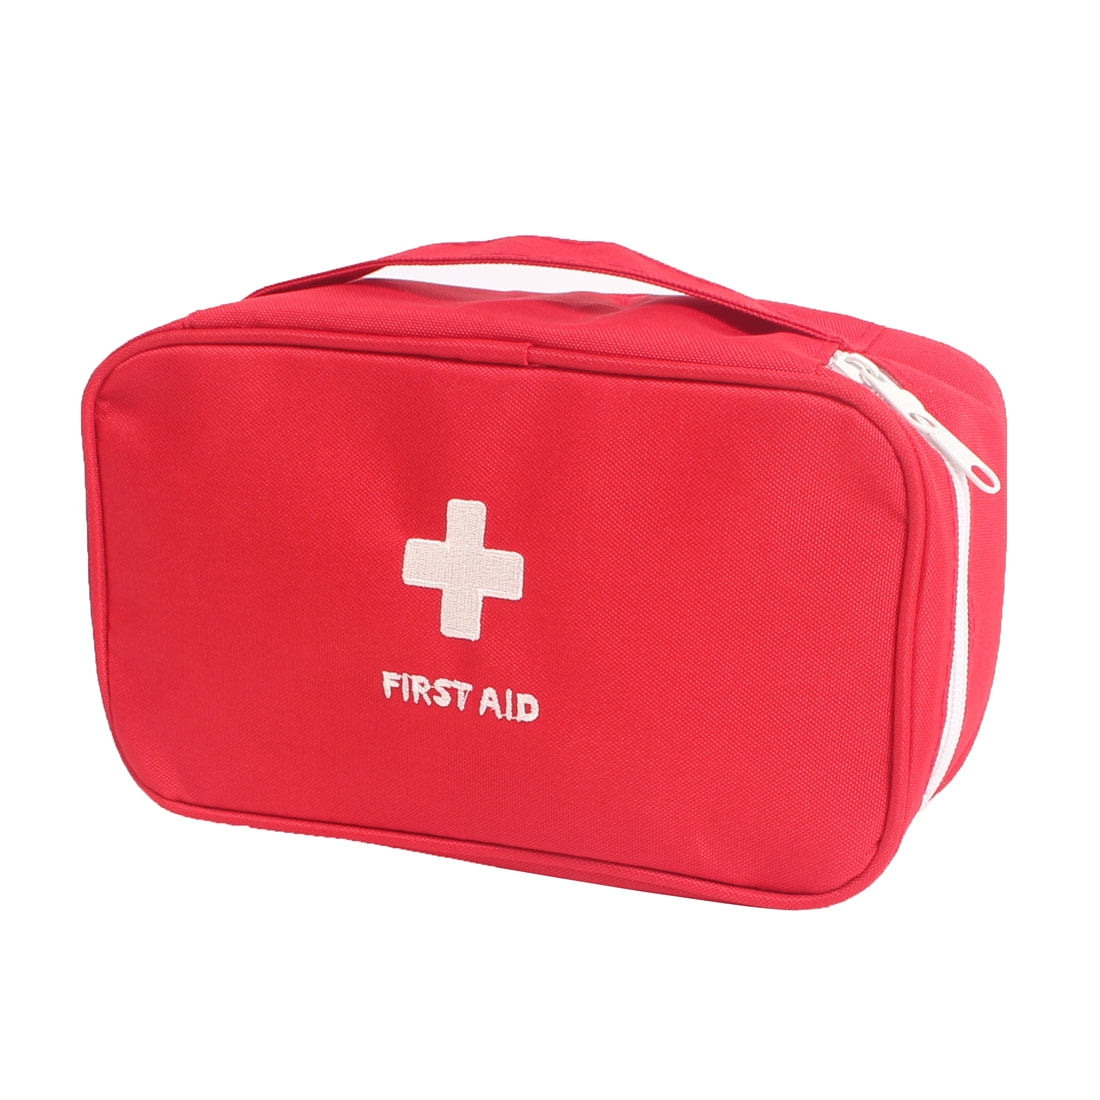 Outdoor Hiking Camping Survival Travel Emergency First Aid Rescue Bag Case Kit 